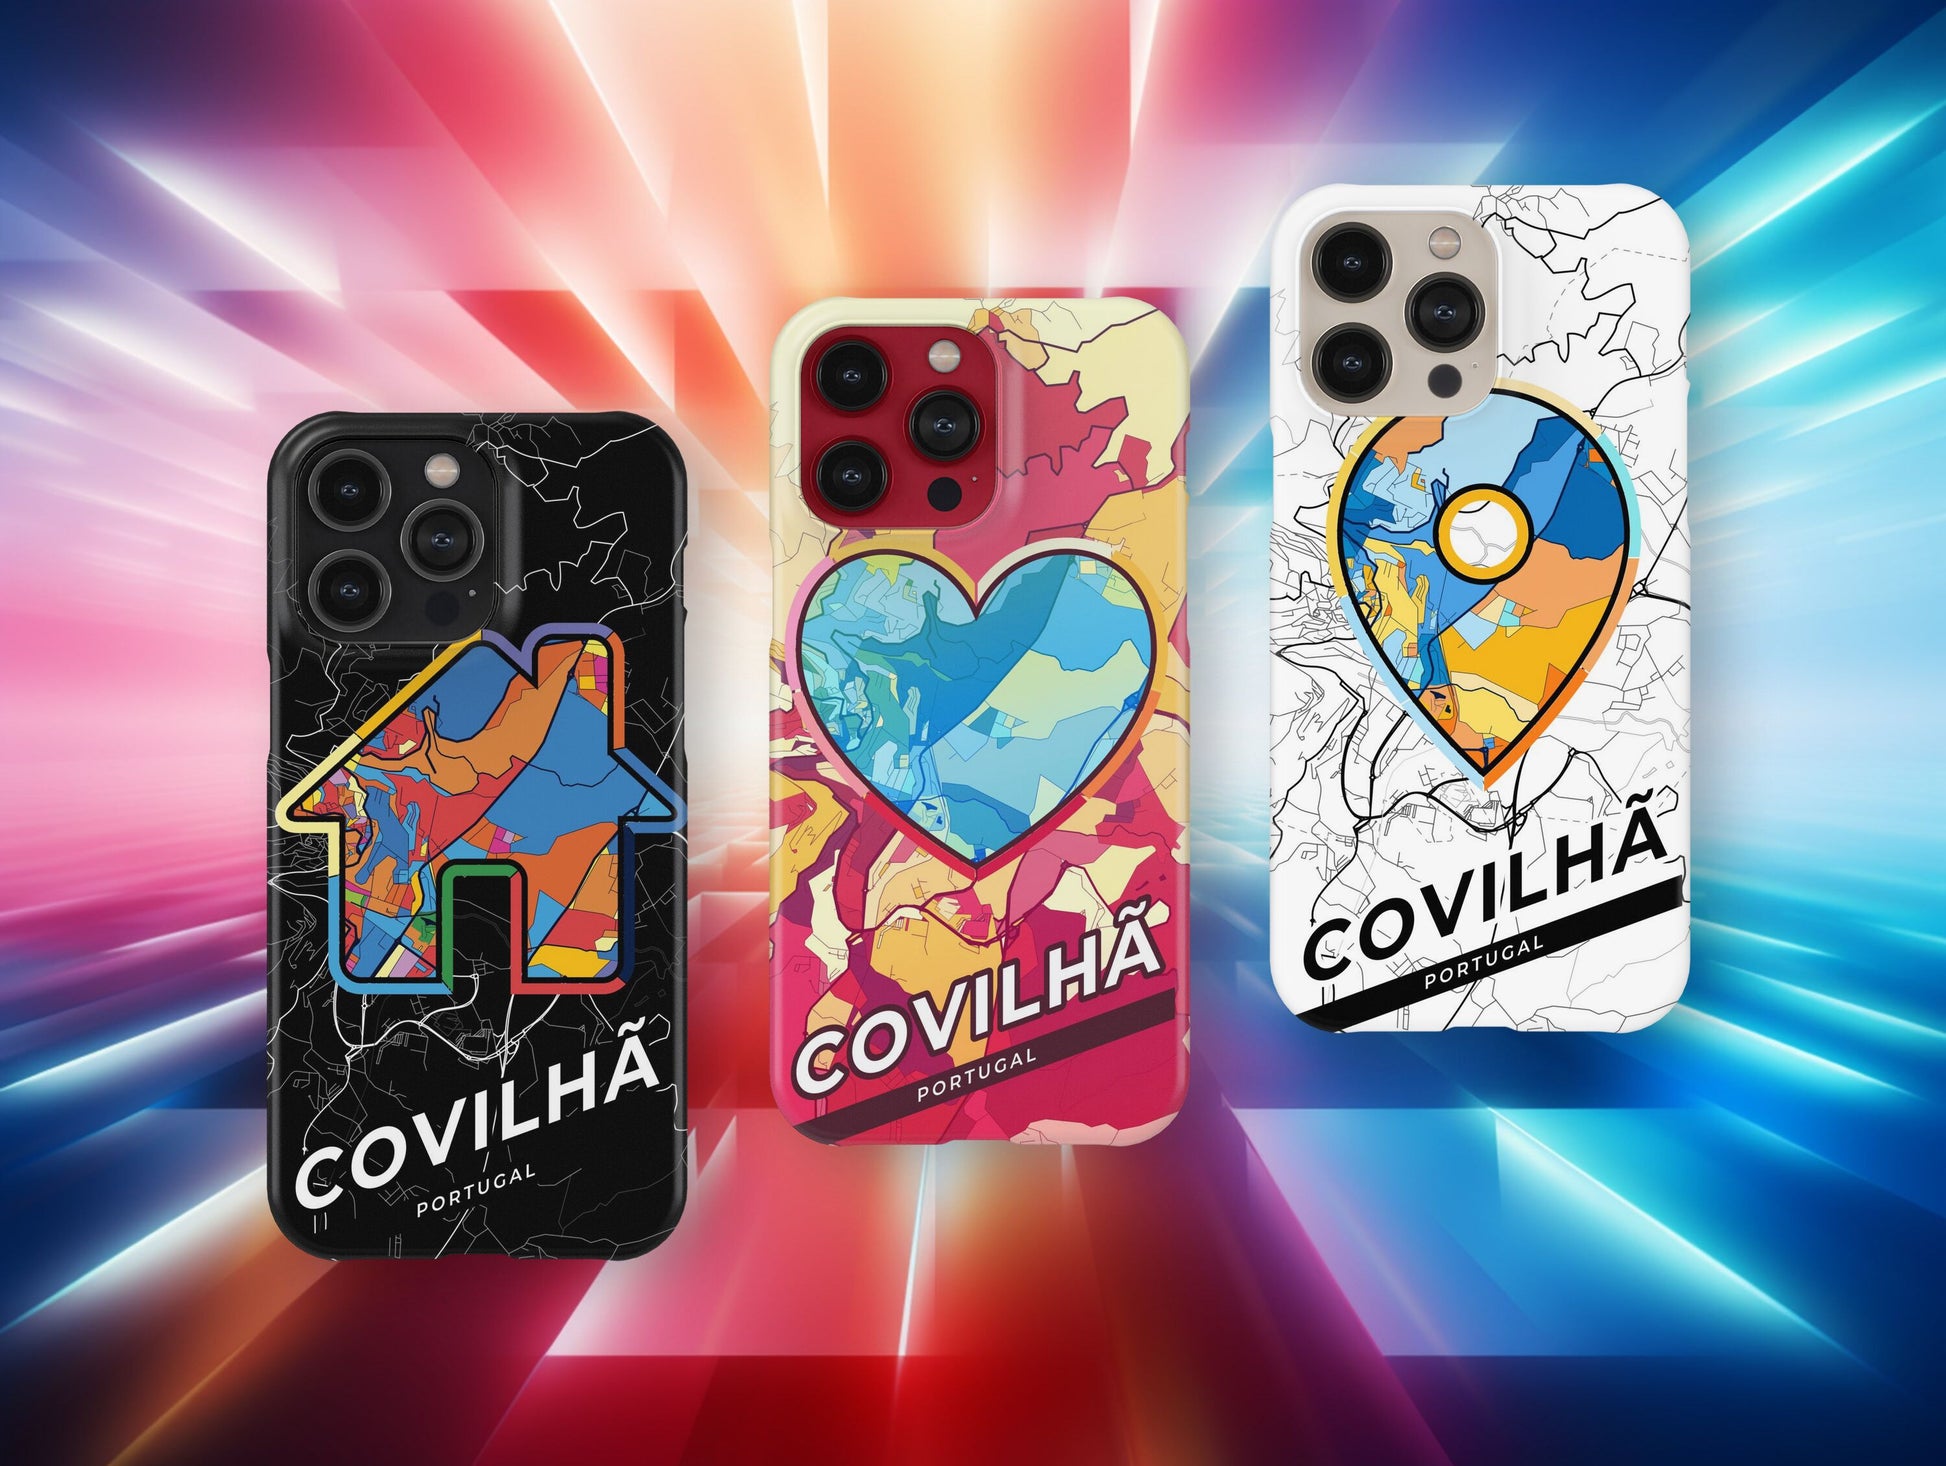 Covilhã Portugal slim phone case with colorful icon. Birthday, wedding or housewarming gift. Couple match cases.